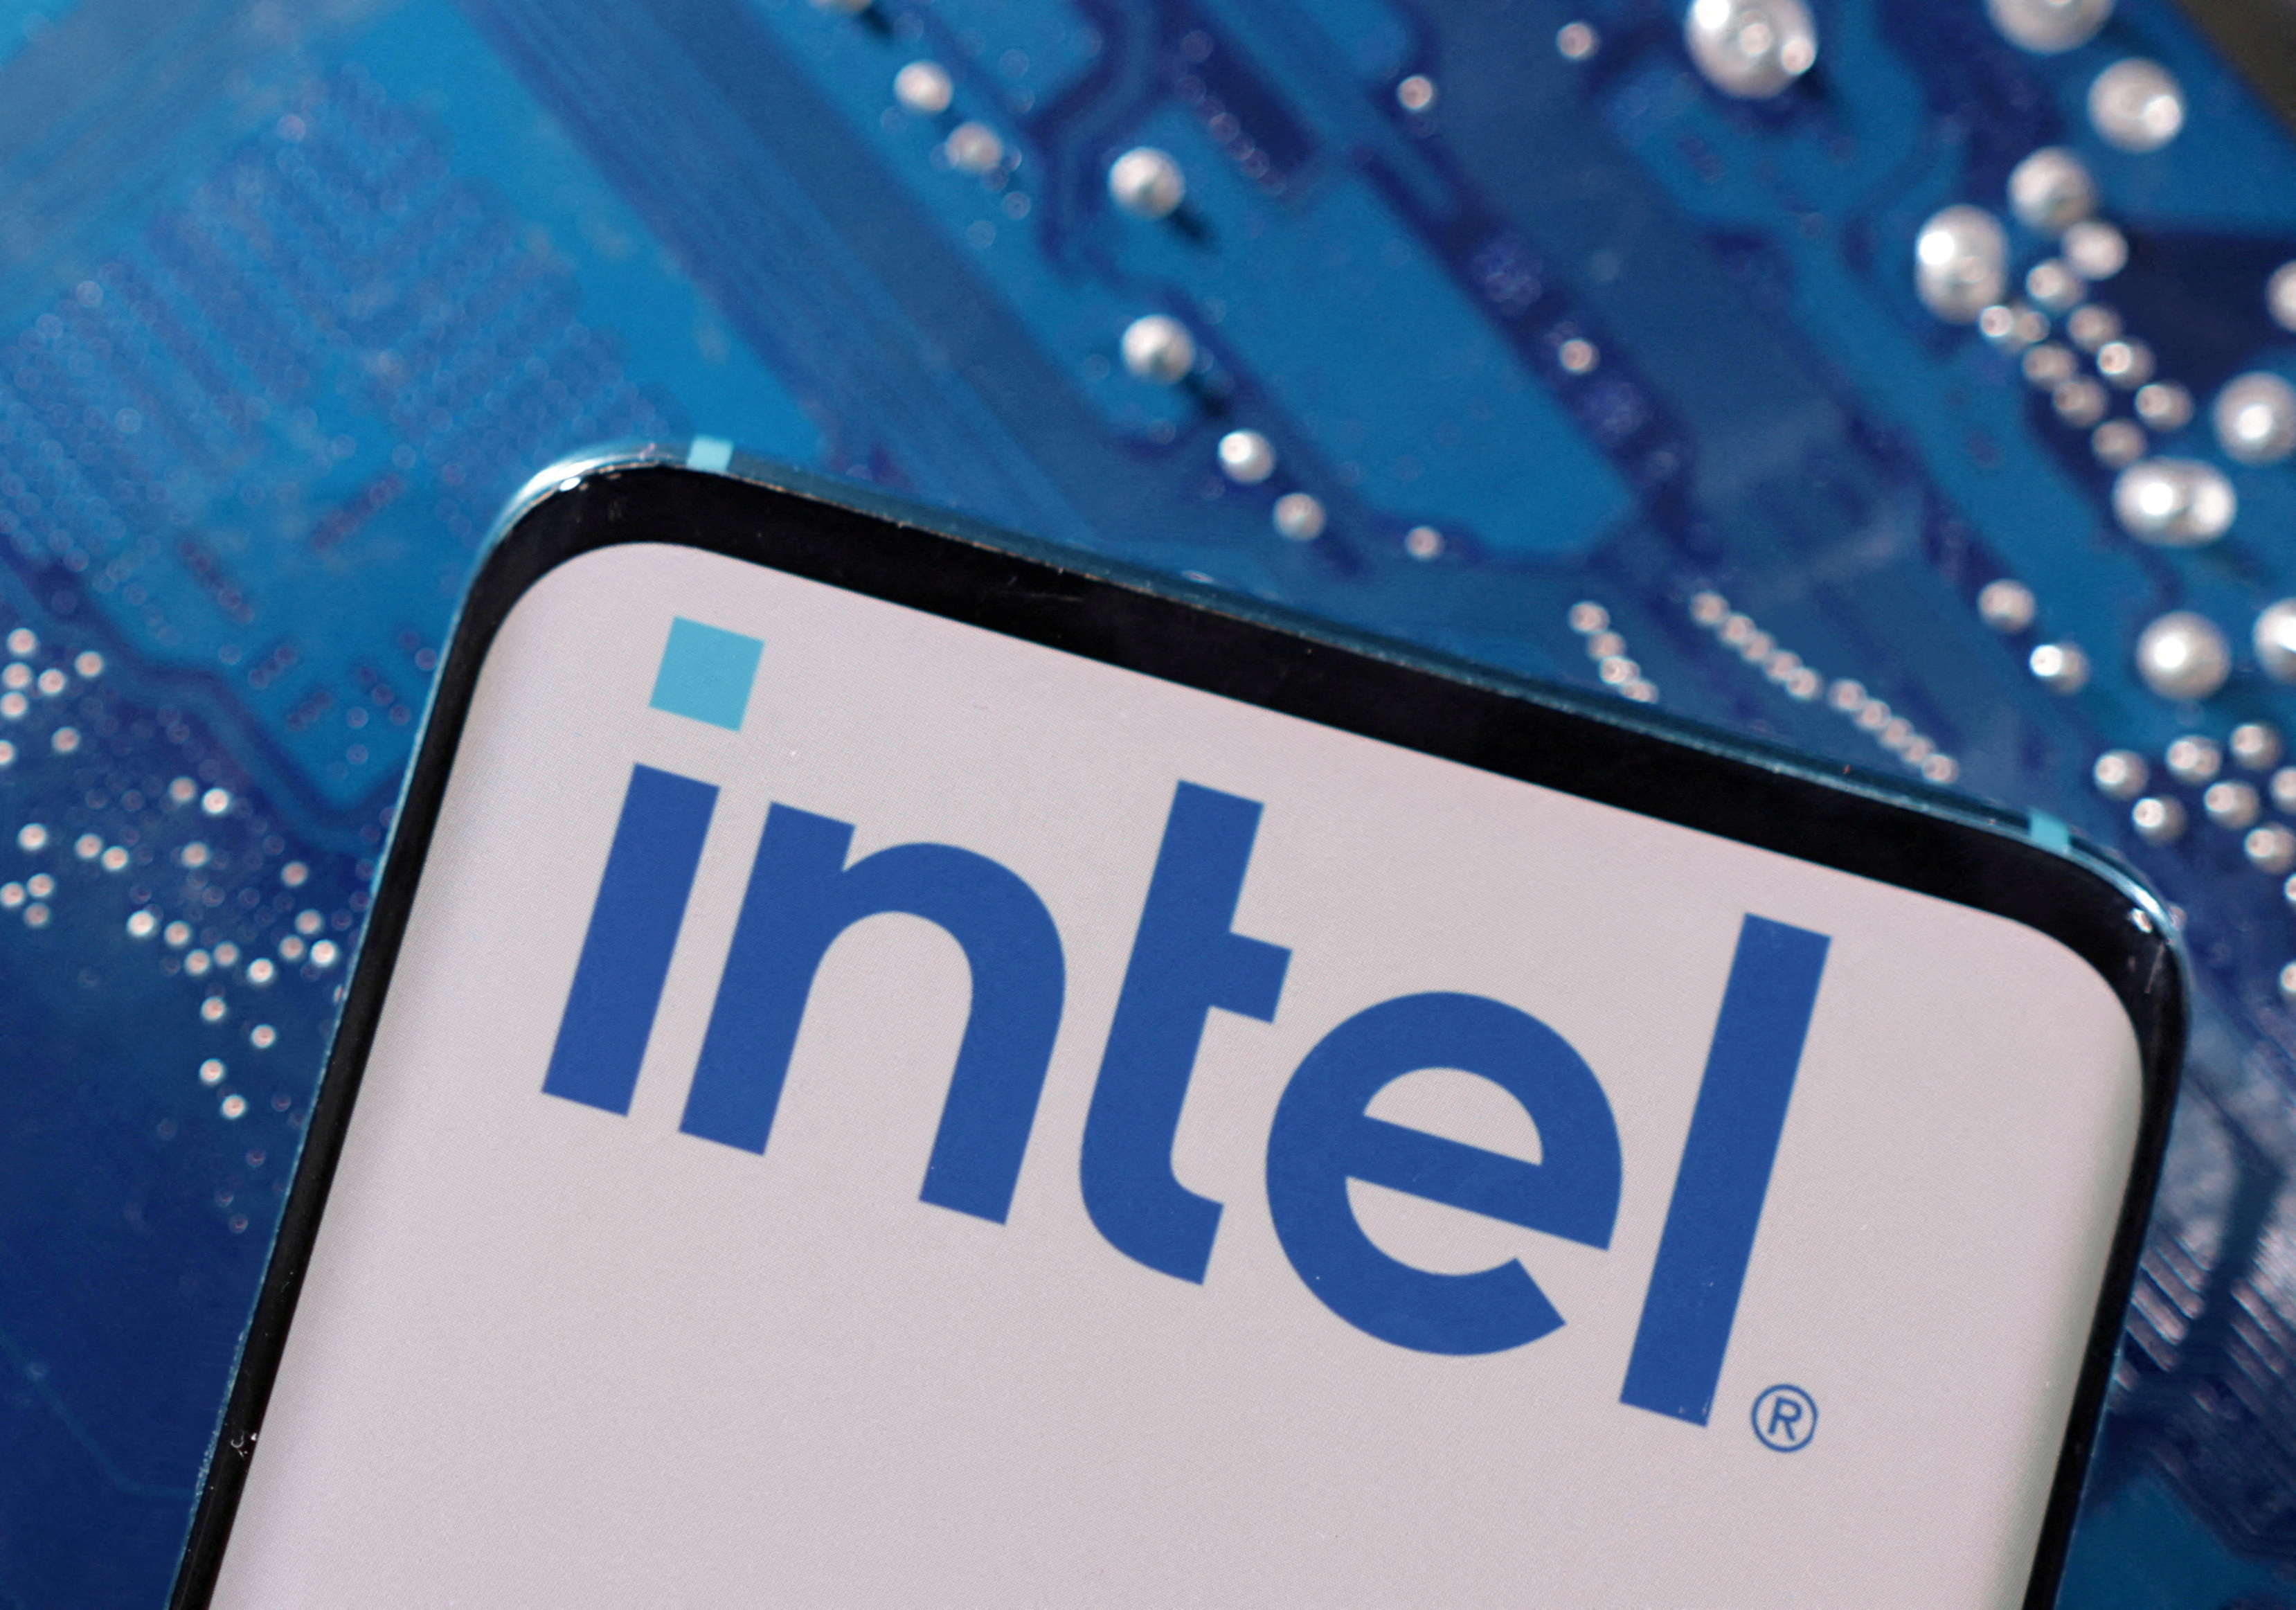 Why Intel's stock has nearly tripled S&P 500's gain in December